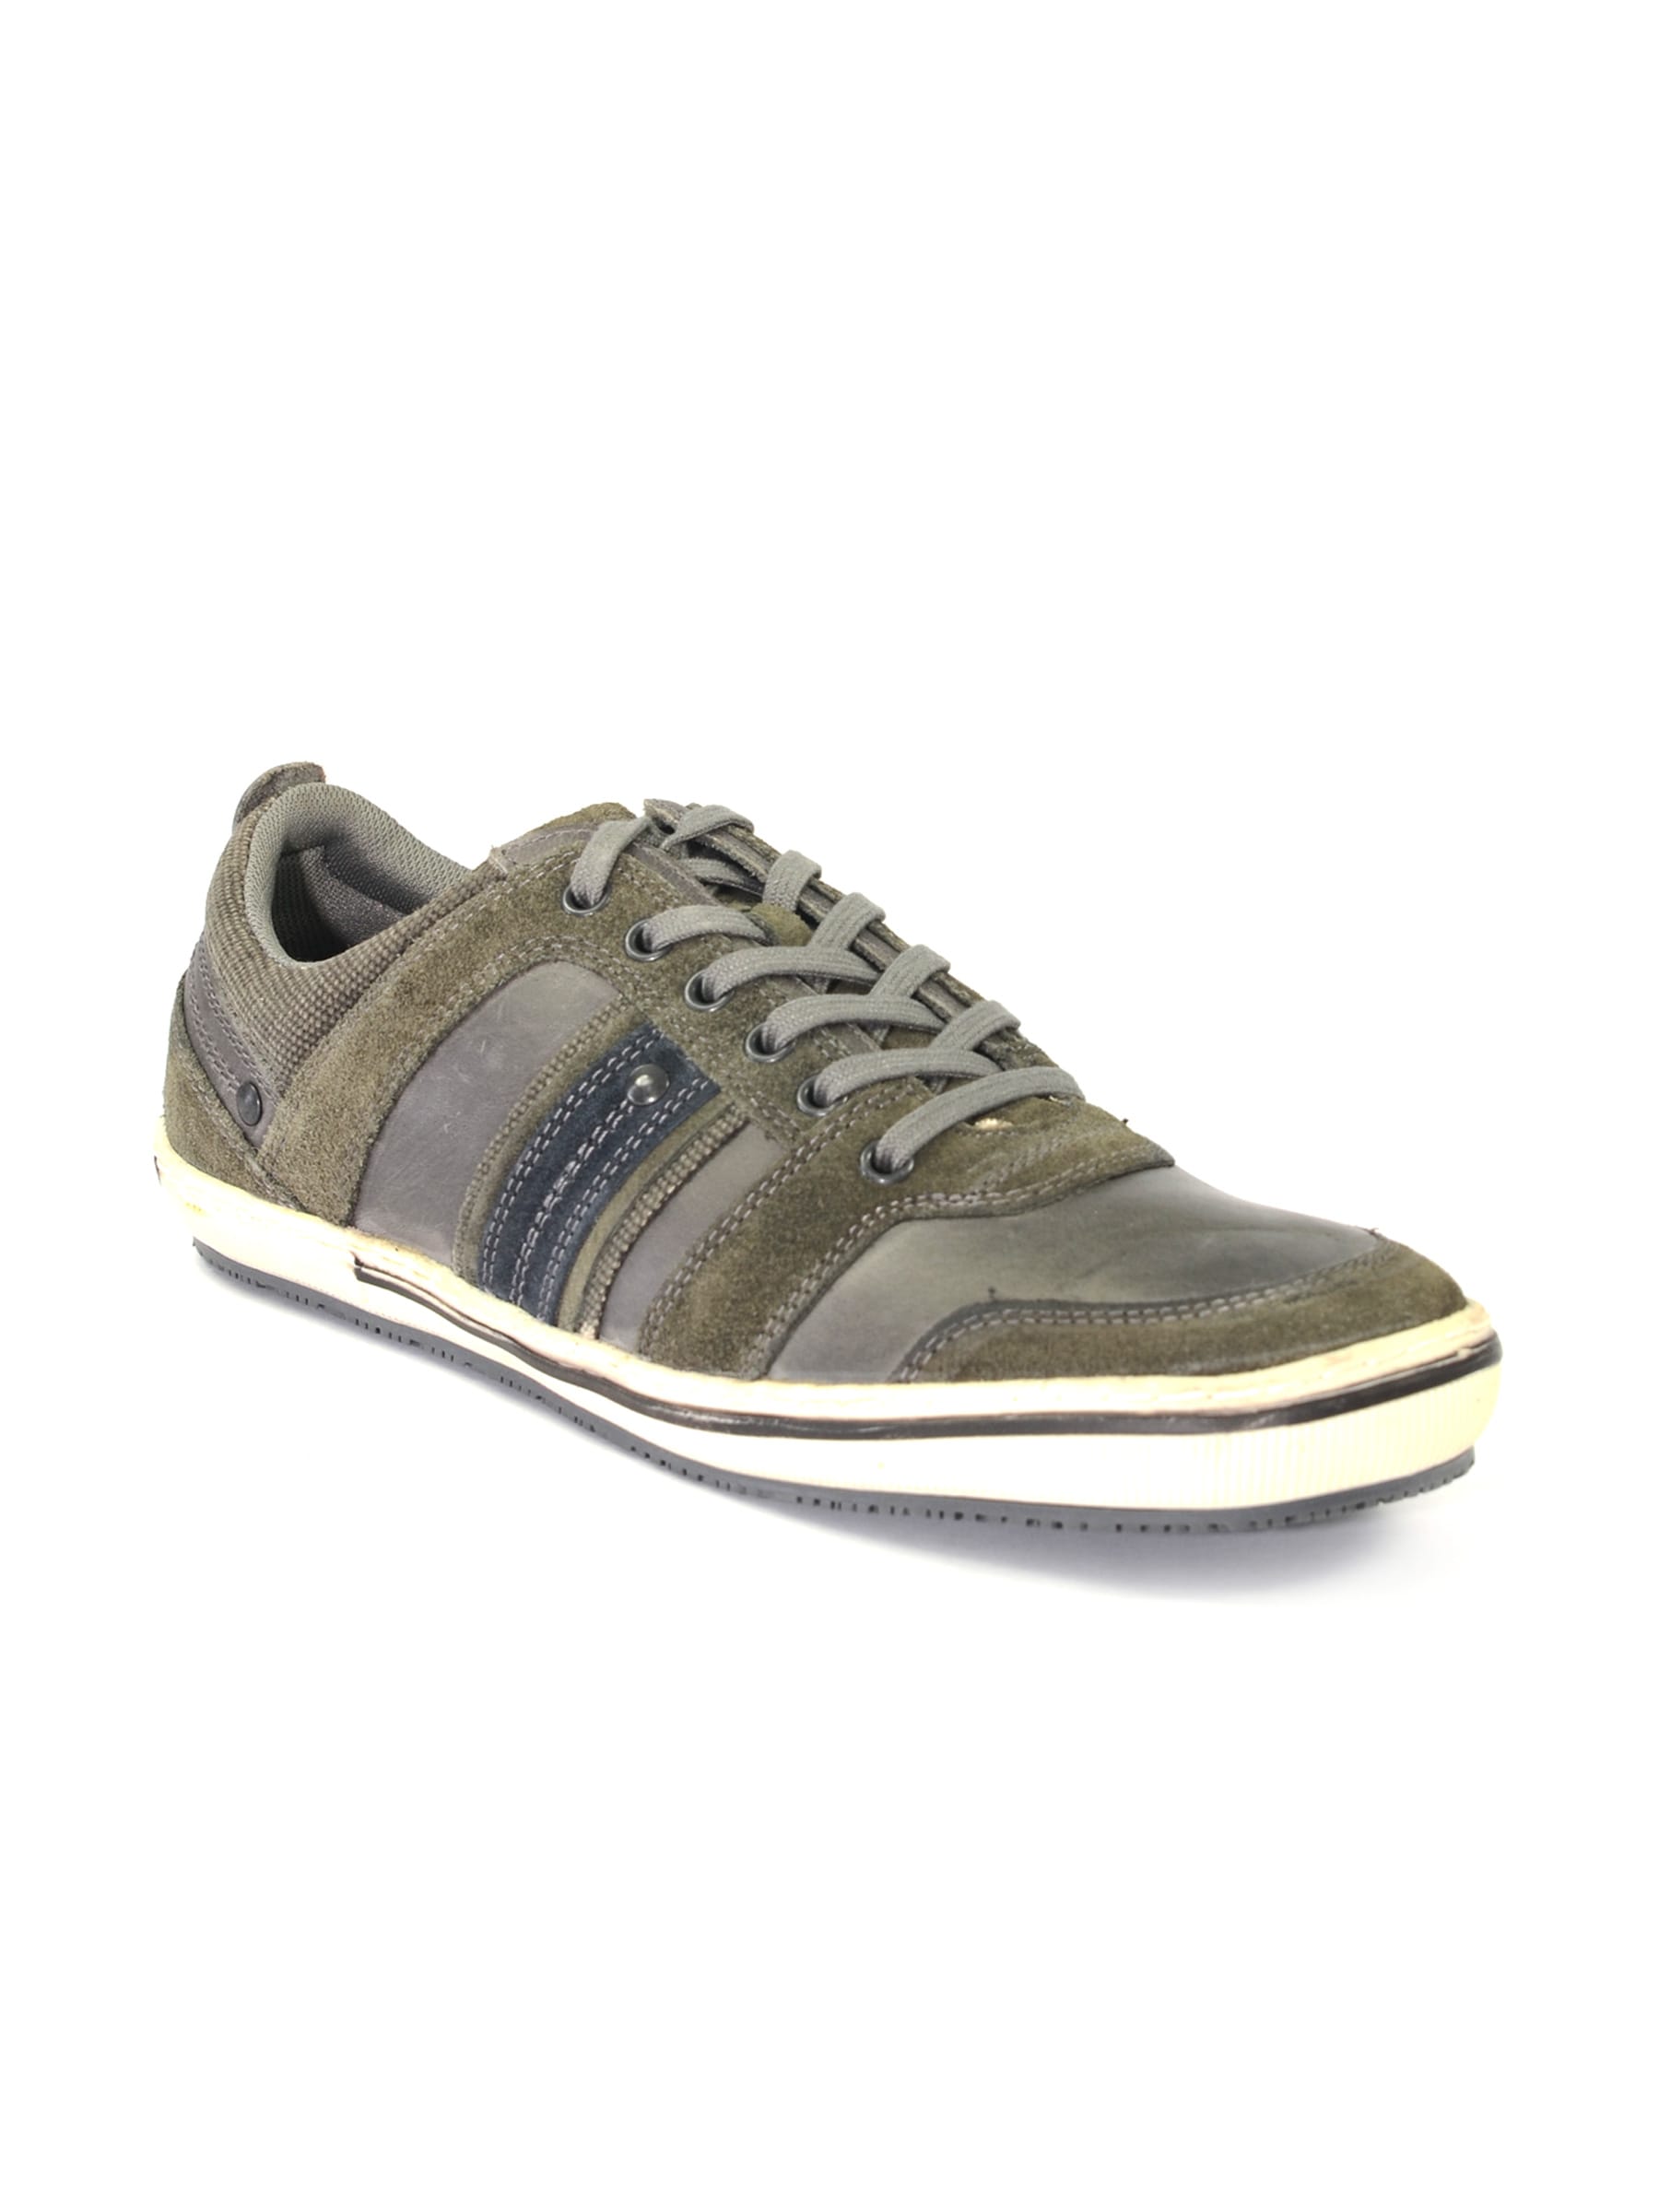 Red Tape Men's Casual Grey Shoe